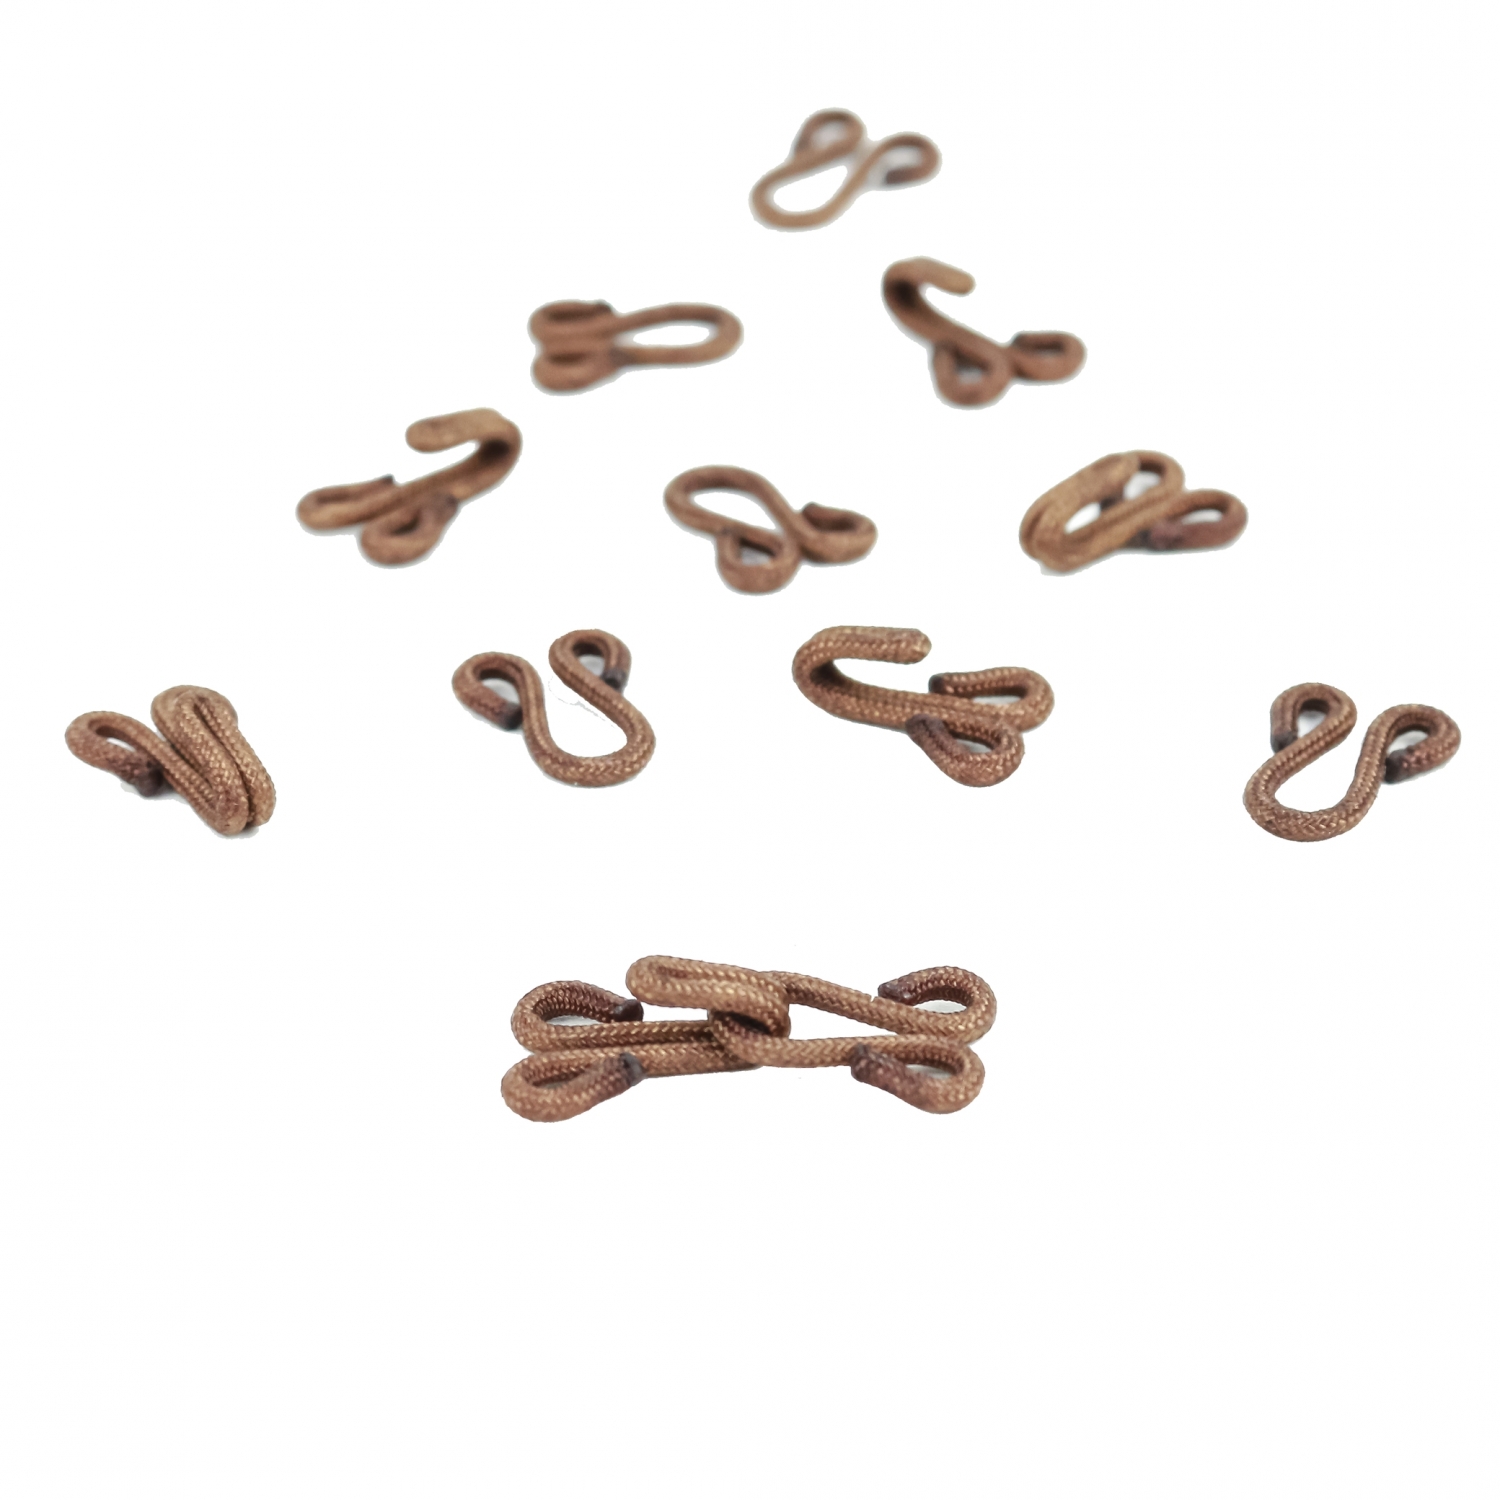 Covered Hook and Eye Clasps, Brown, 30 mm (144 sets/pack)Code: MB Imbracat